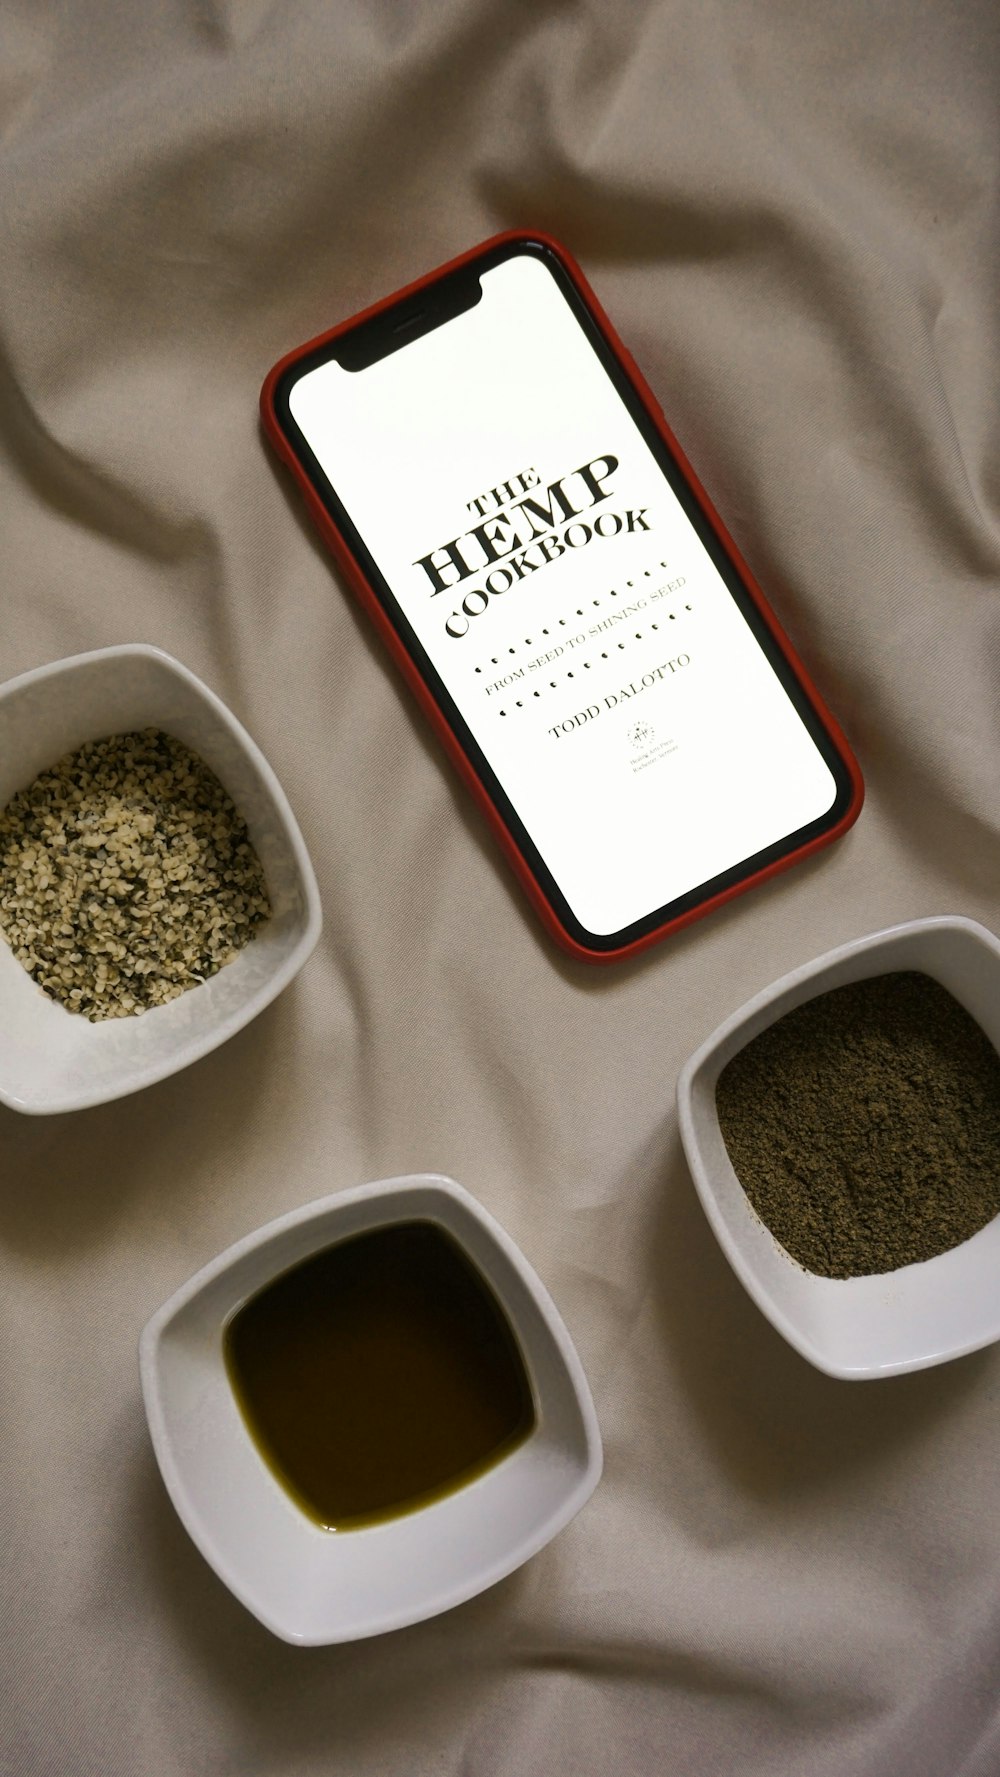 three bowls of spices and a phone on a bed